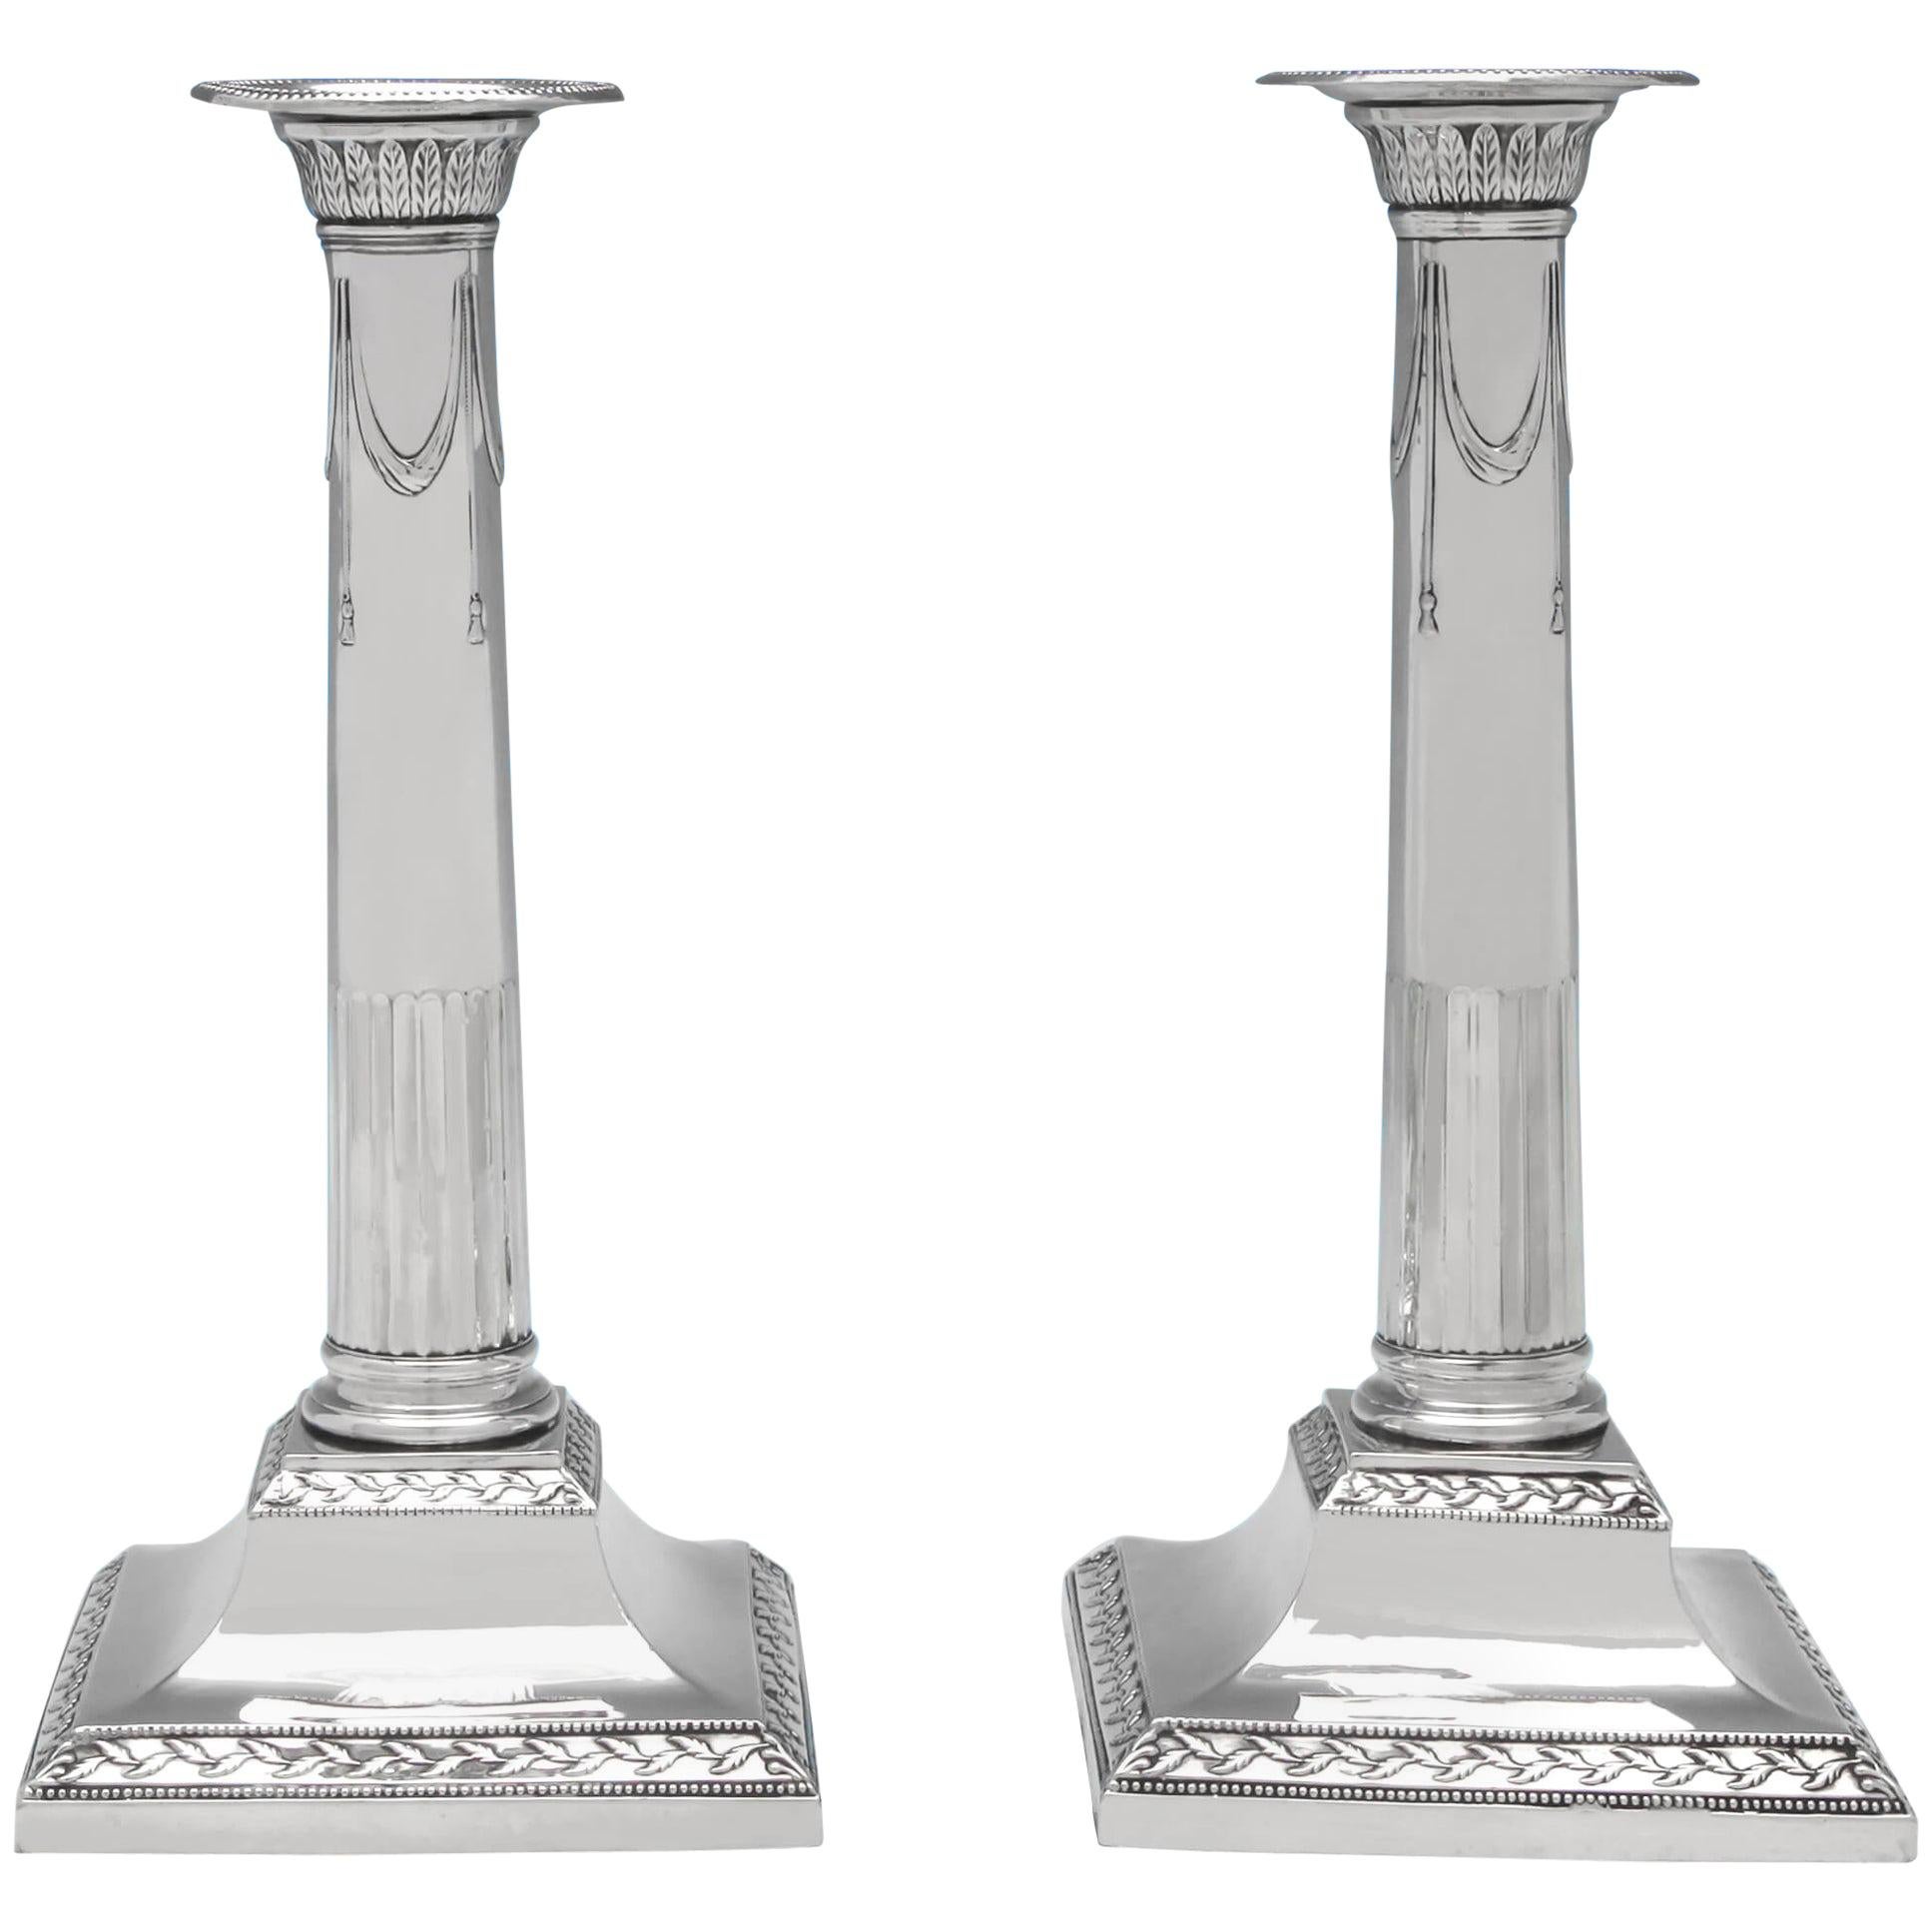 George III Neoclassical Antique Sterling Silver Pair of Candlesticks from 1790